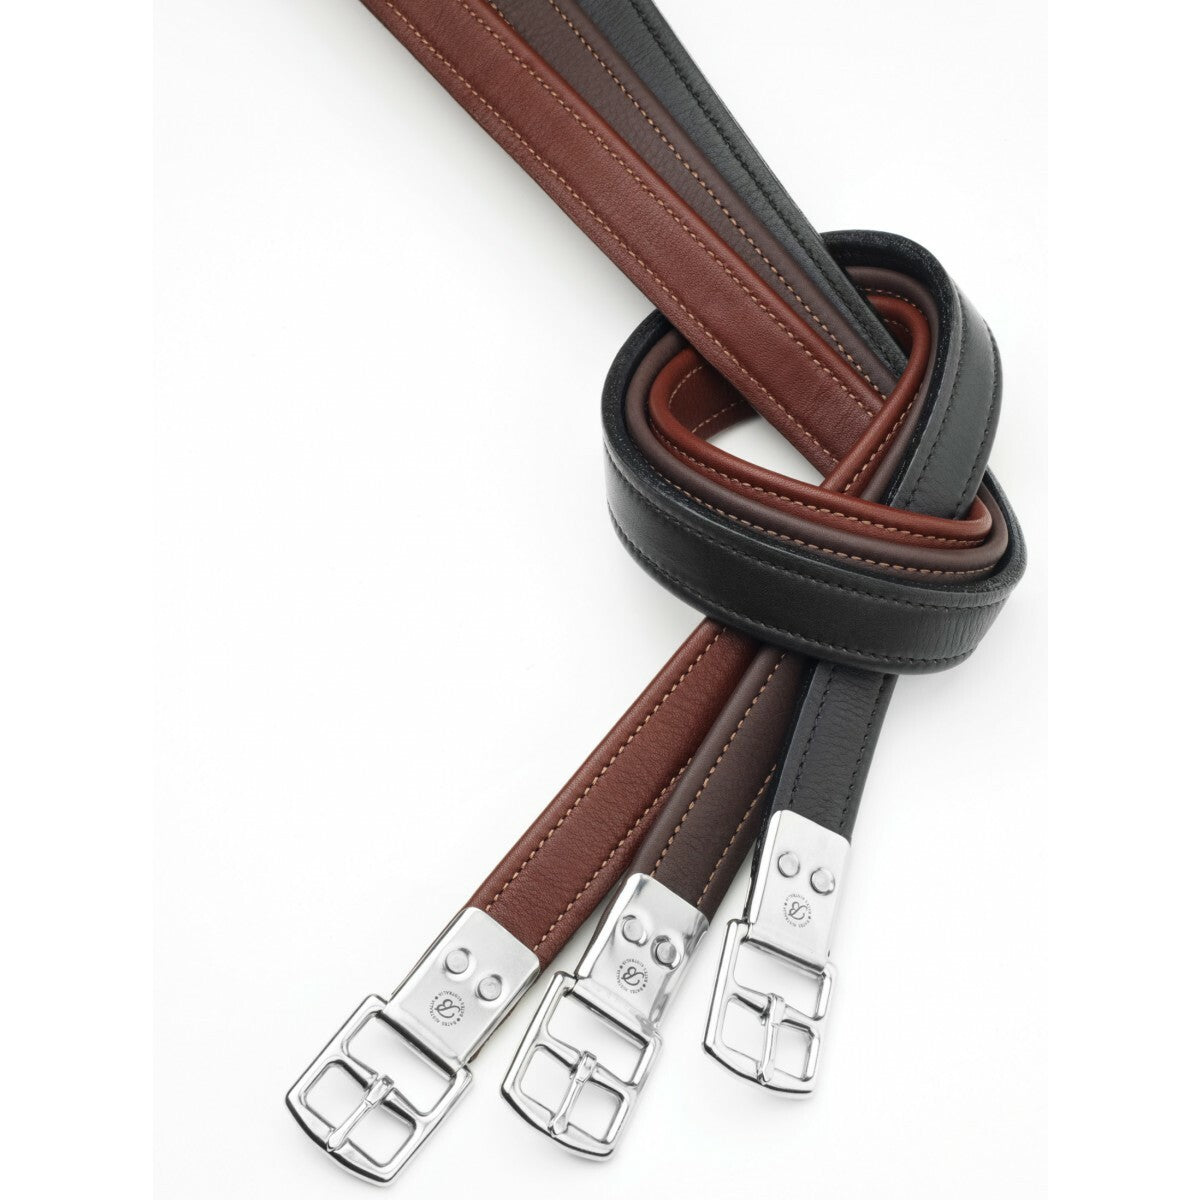 Bates Stirrup Leathers Heritage Blk 137Cm - The Trading Stables